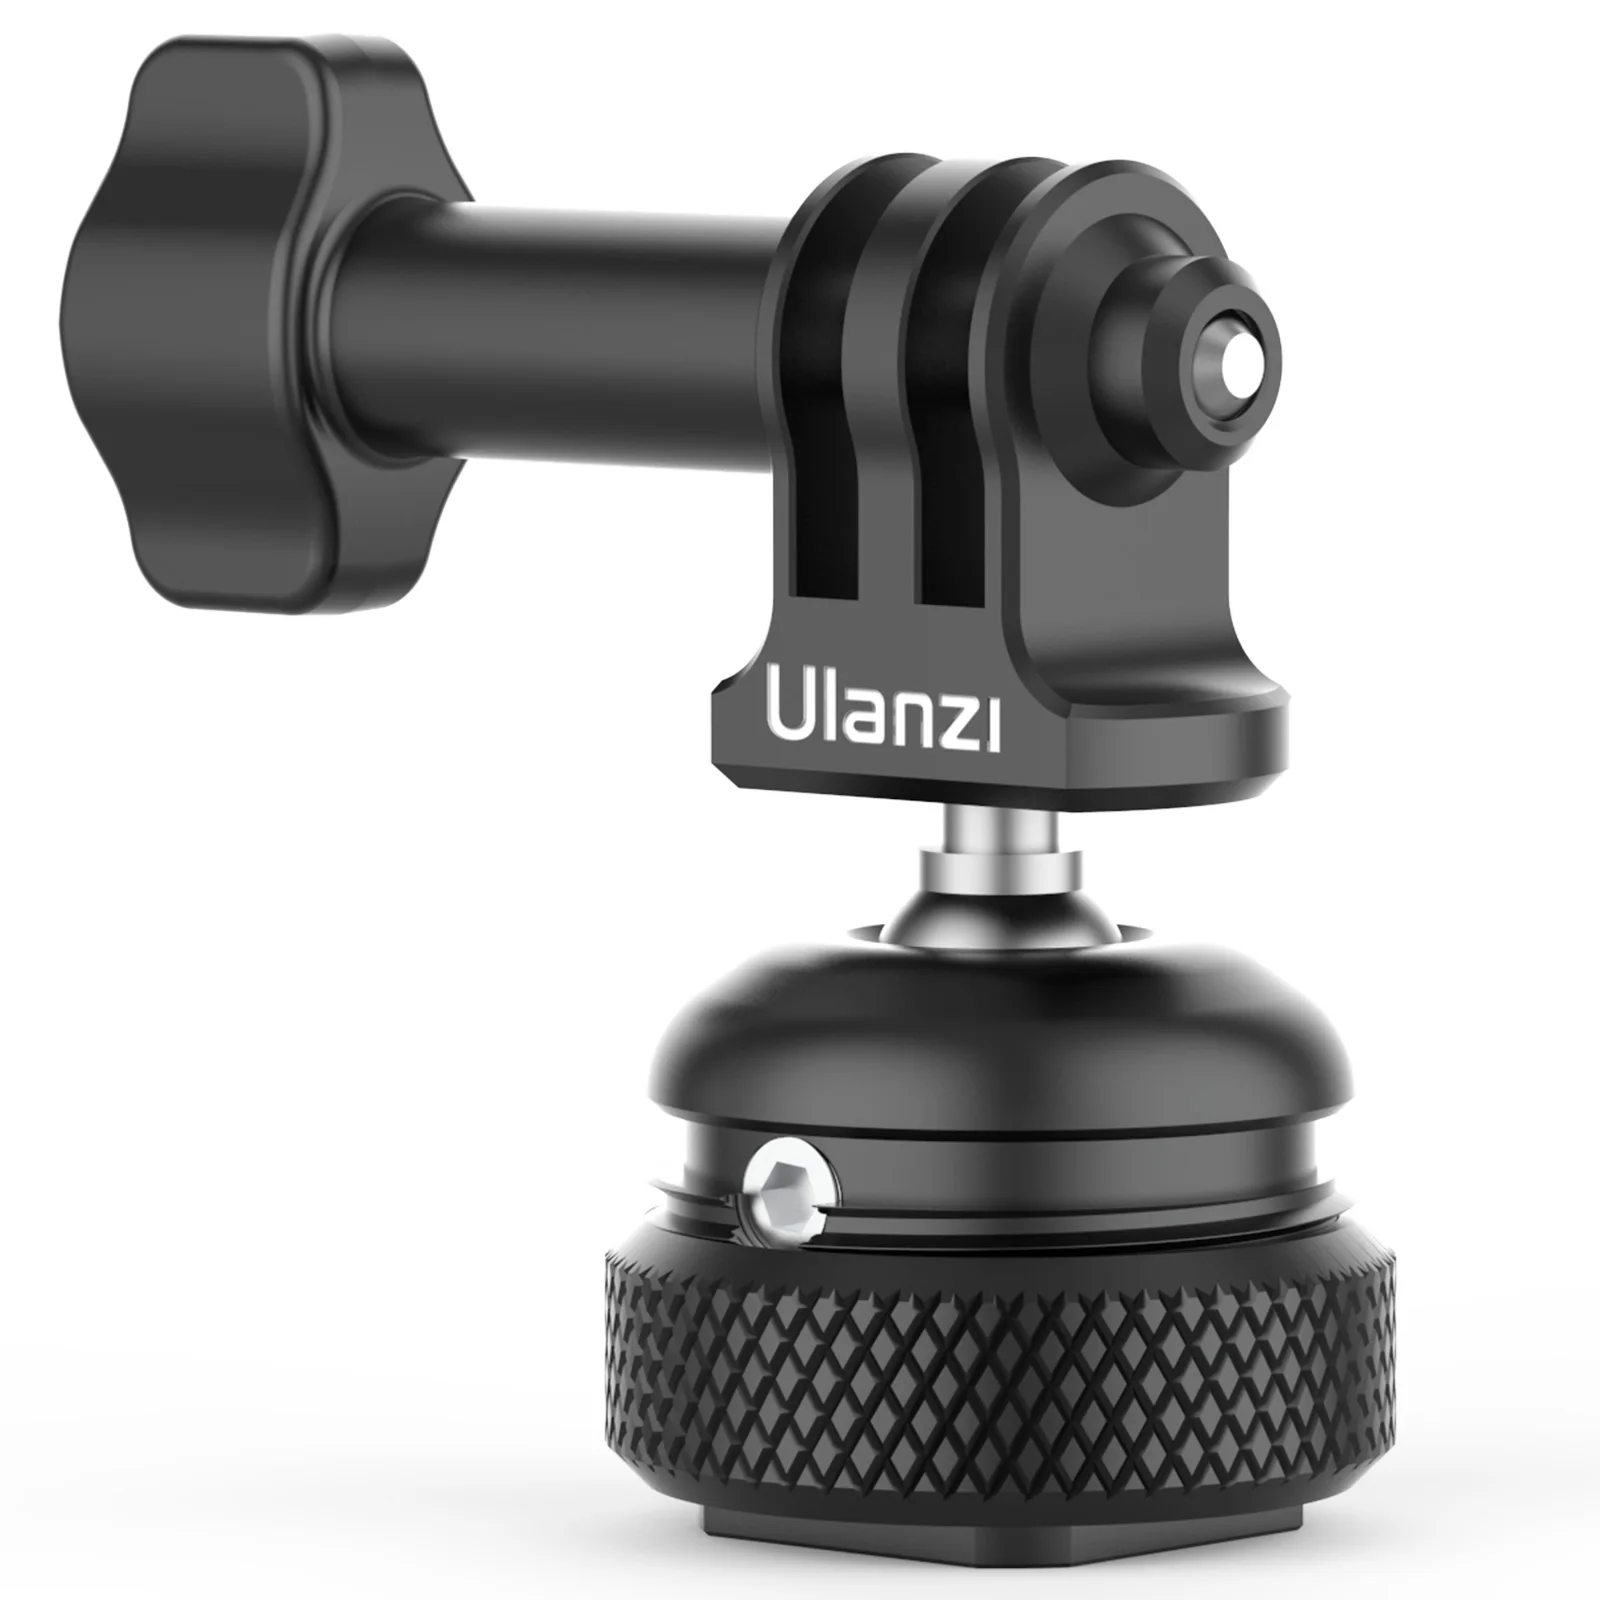 

NEWEST Ulanzi GP-6 Base Mount Cold Shoe 1/4'' for GoPro 9/8/7 Universal Adapter Mount 360 Degree Adjustable Ball head Adapter, Black